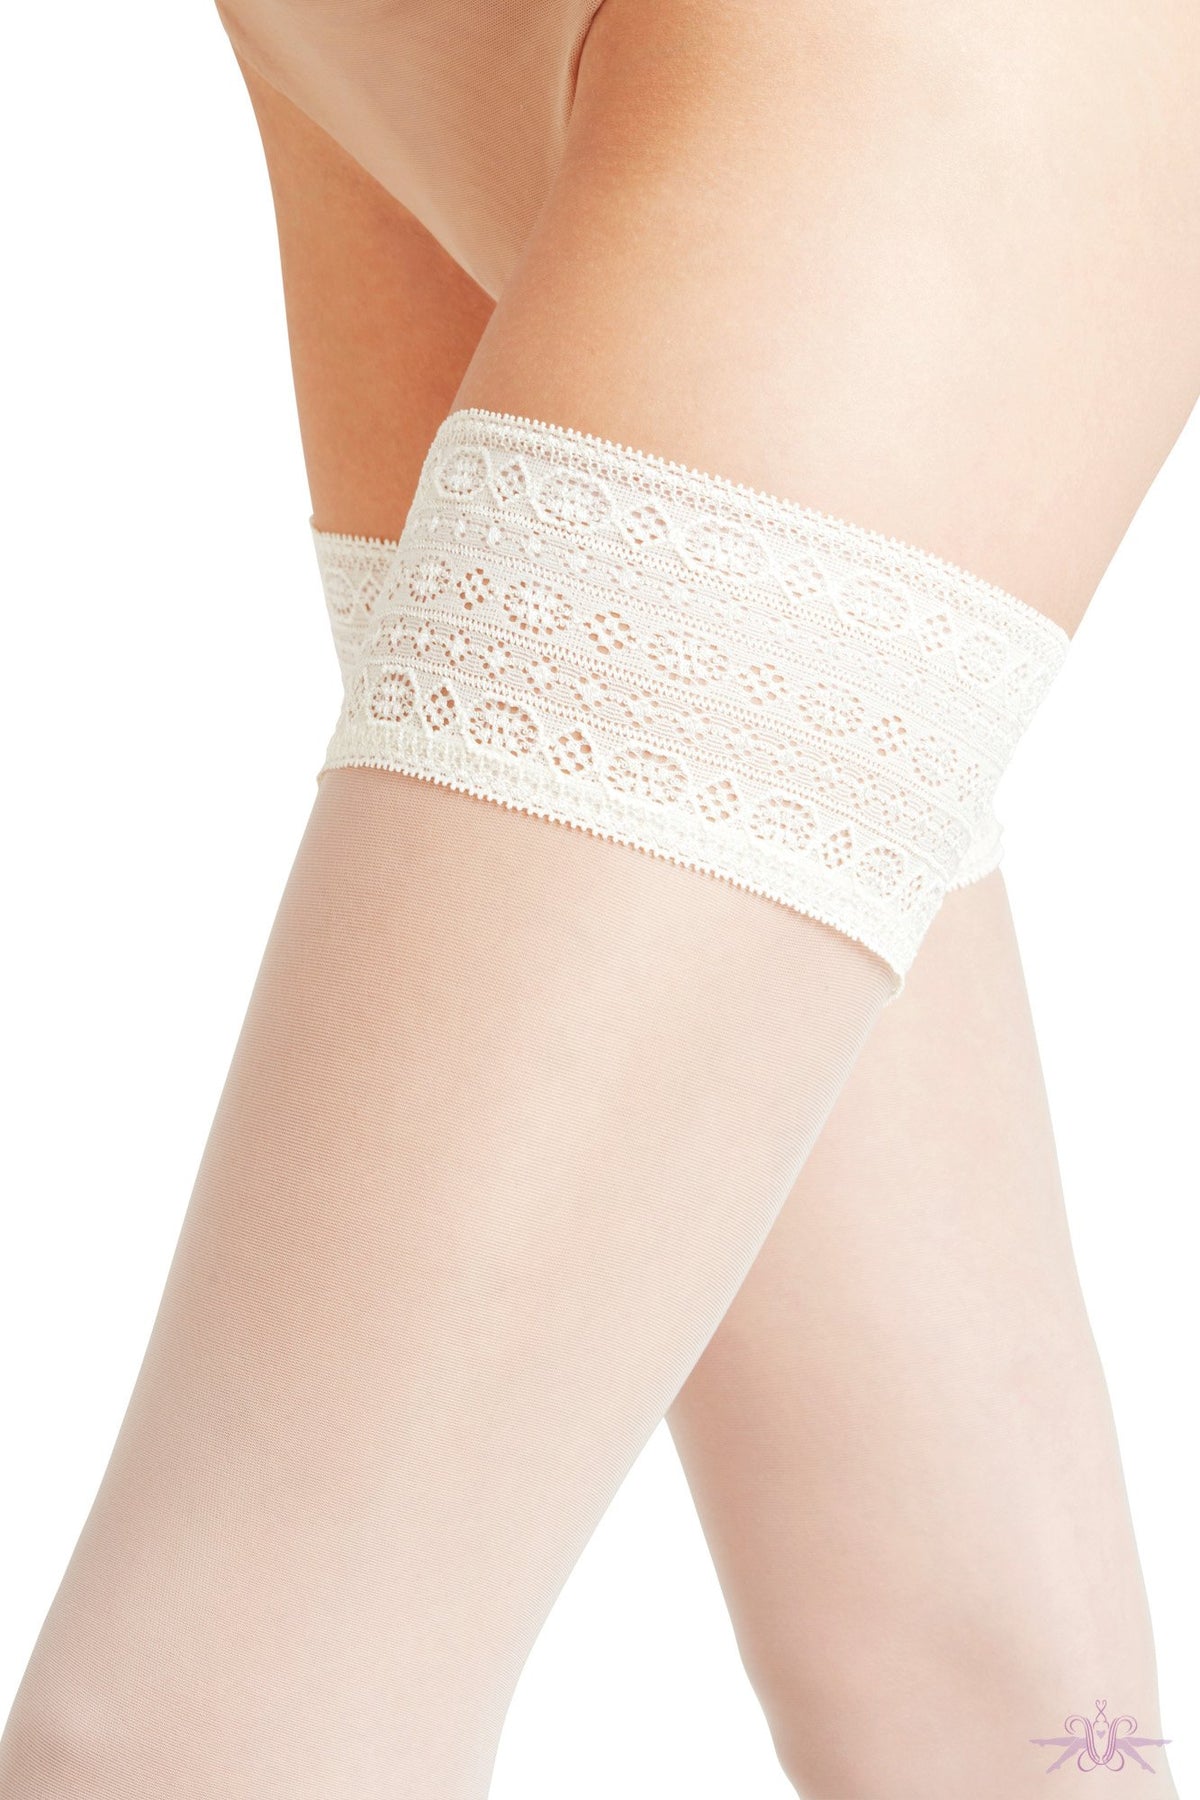 Charnos Bridal Lace Stockings at the Hosiery Box White Stockings